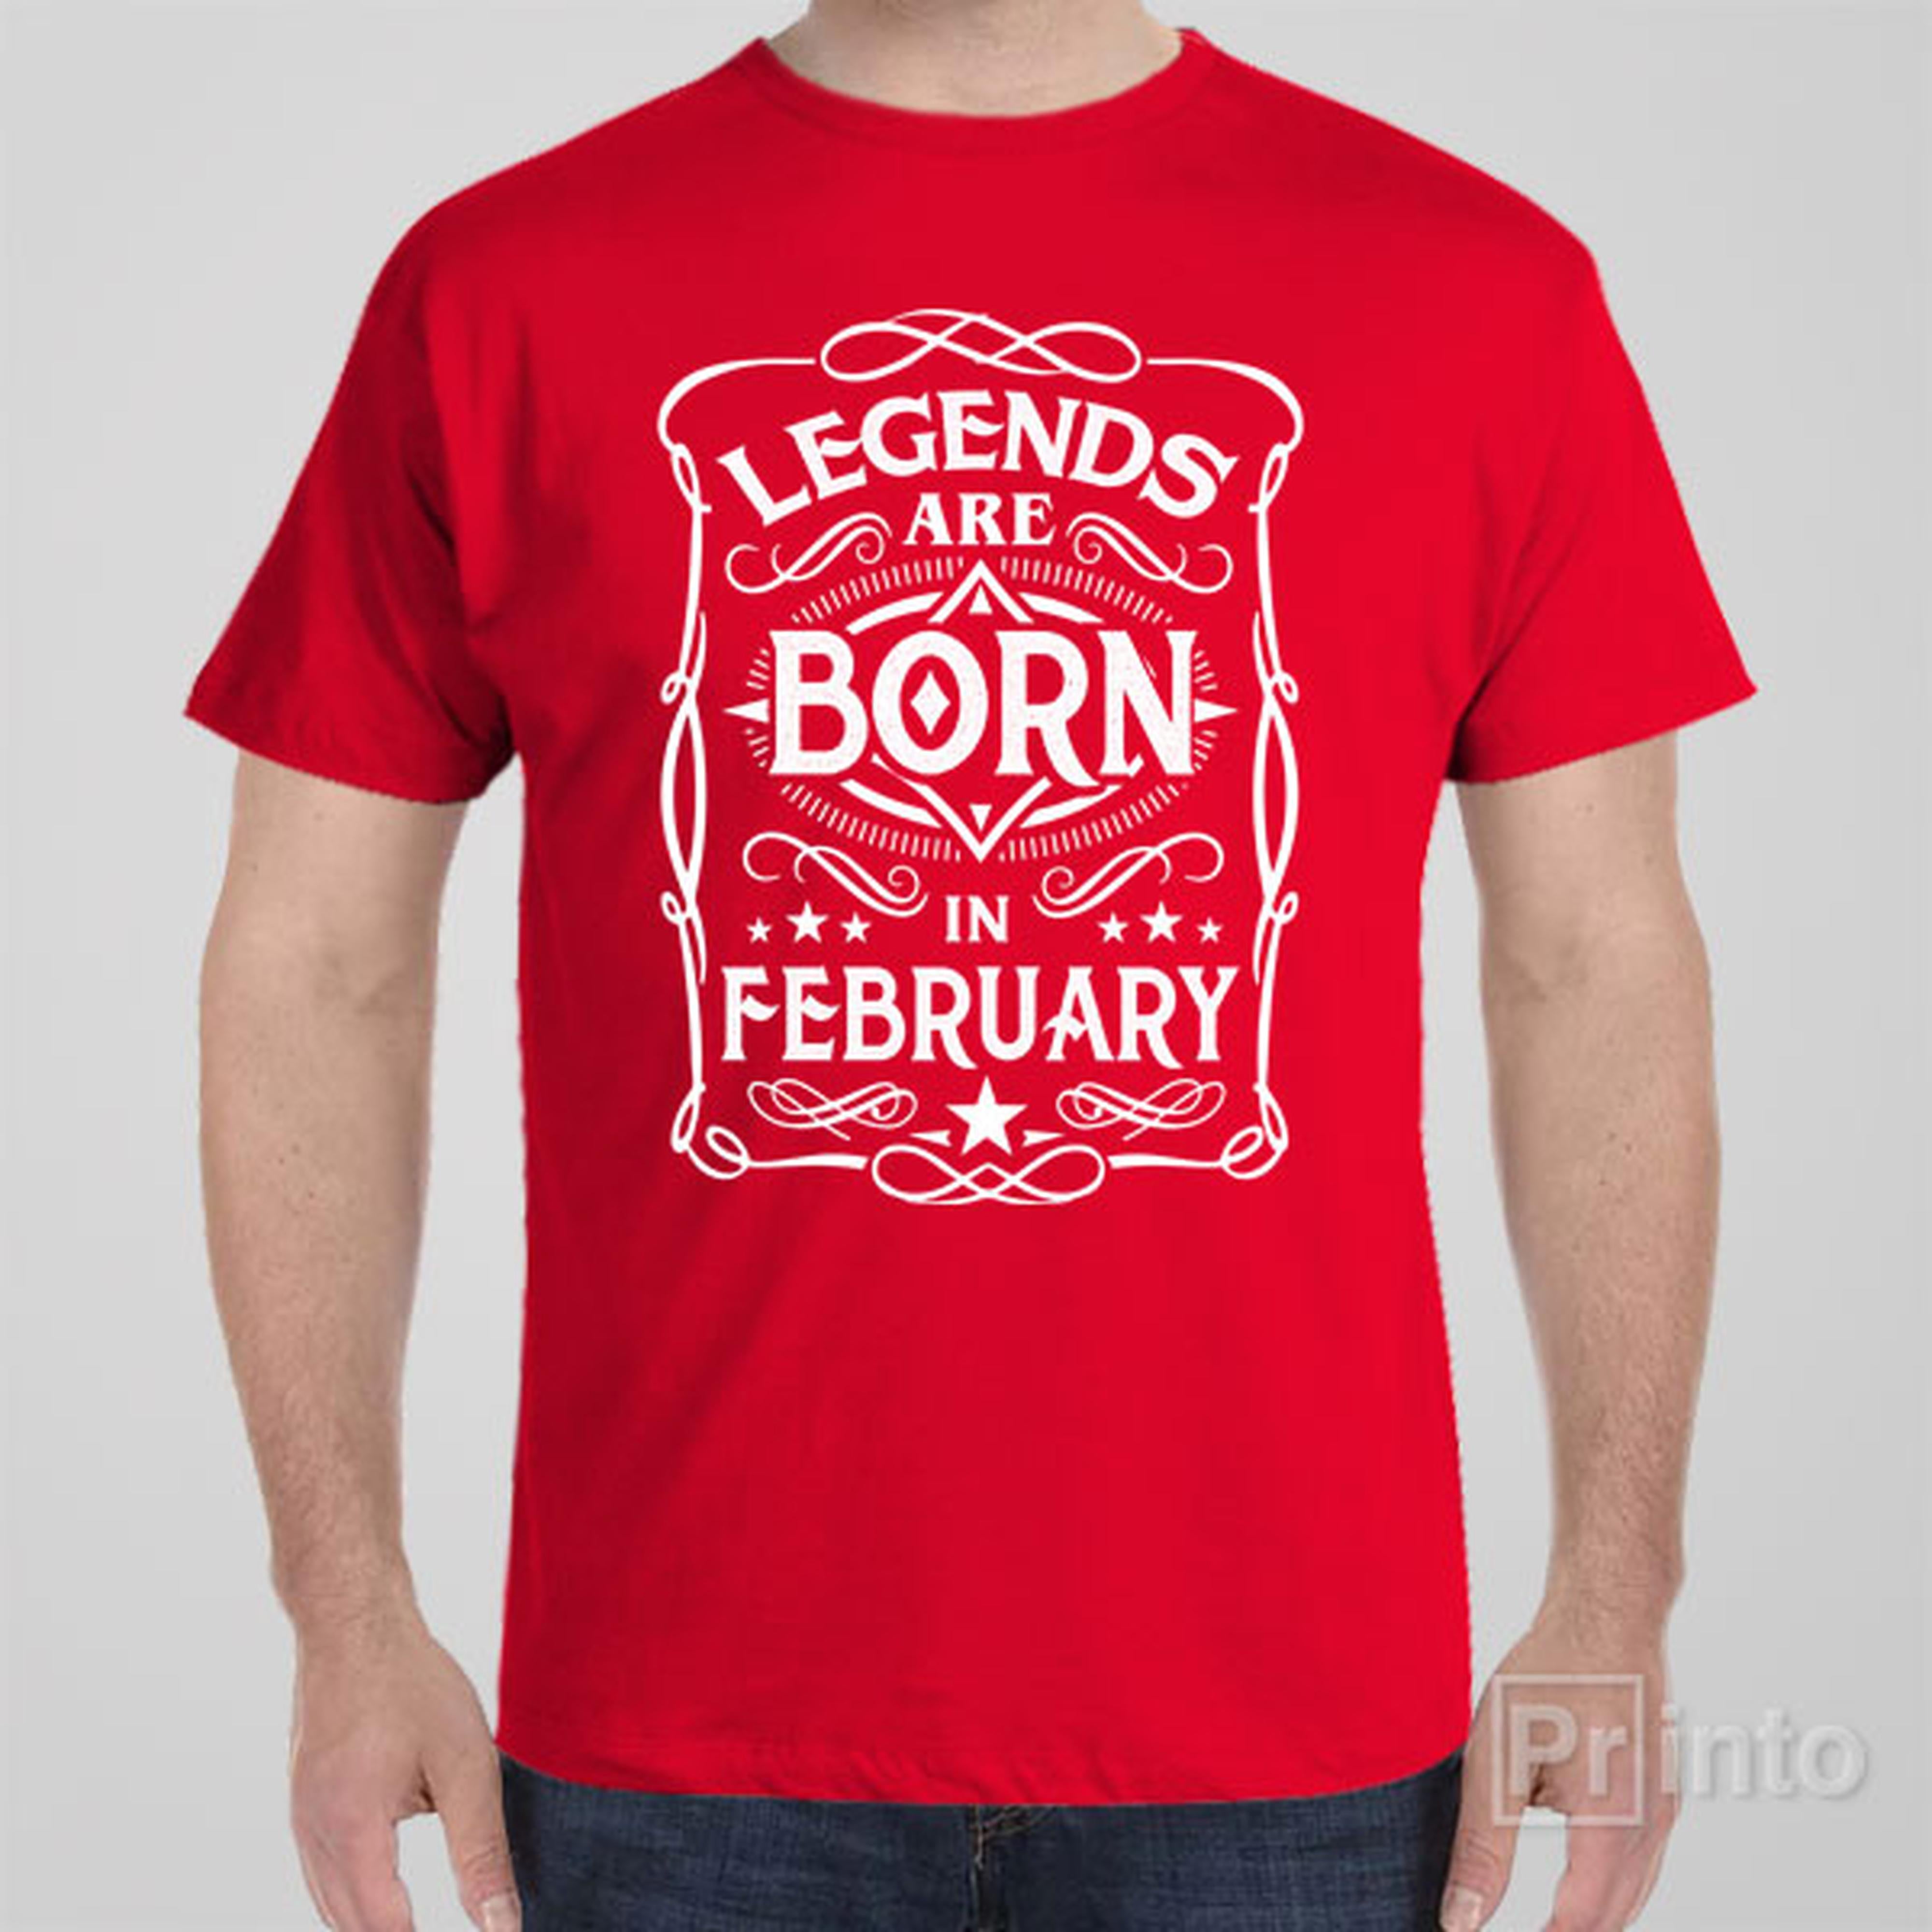 legends-are-born-in-february-t-shirt